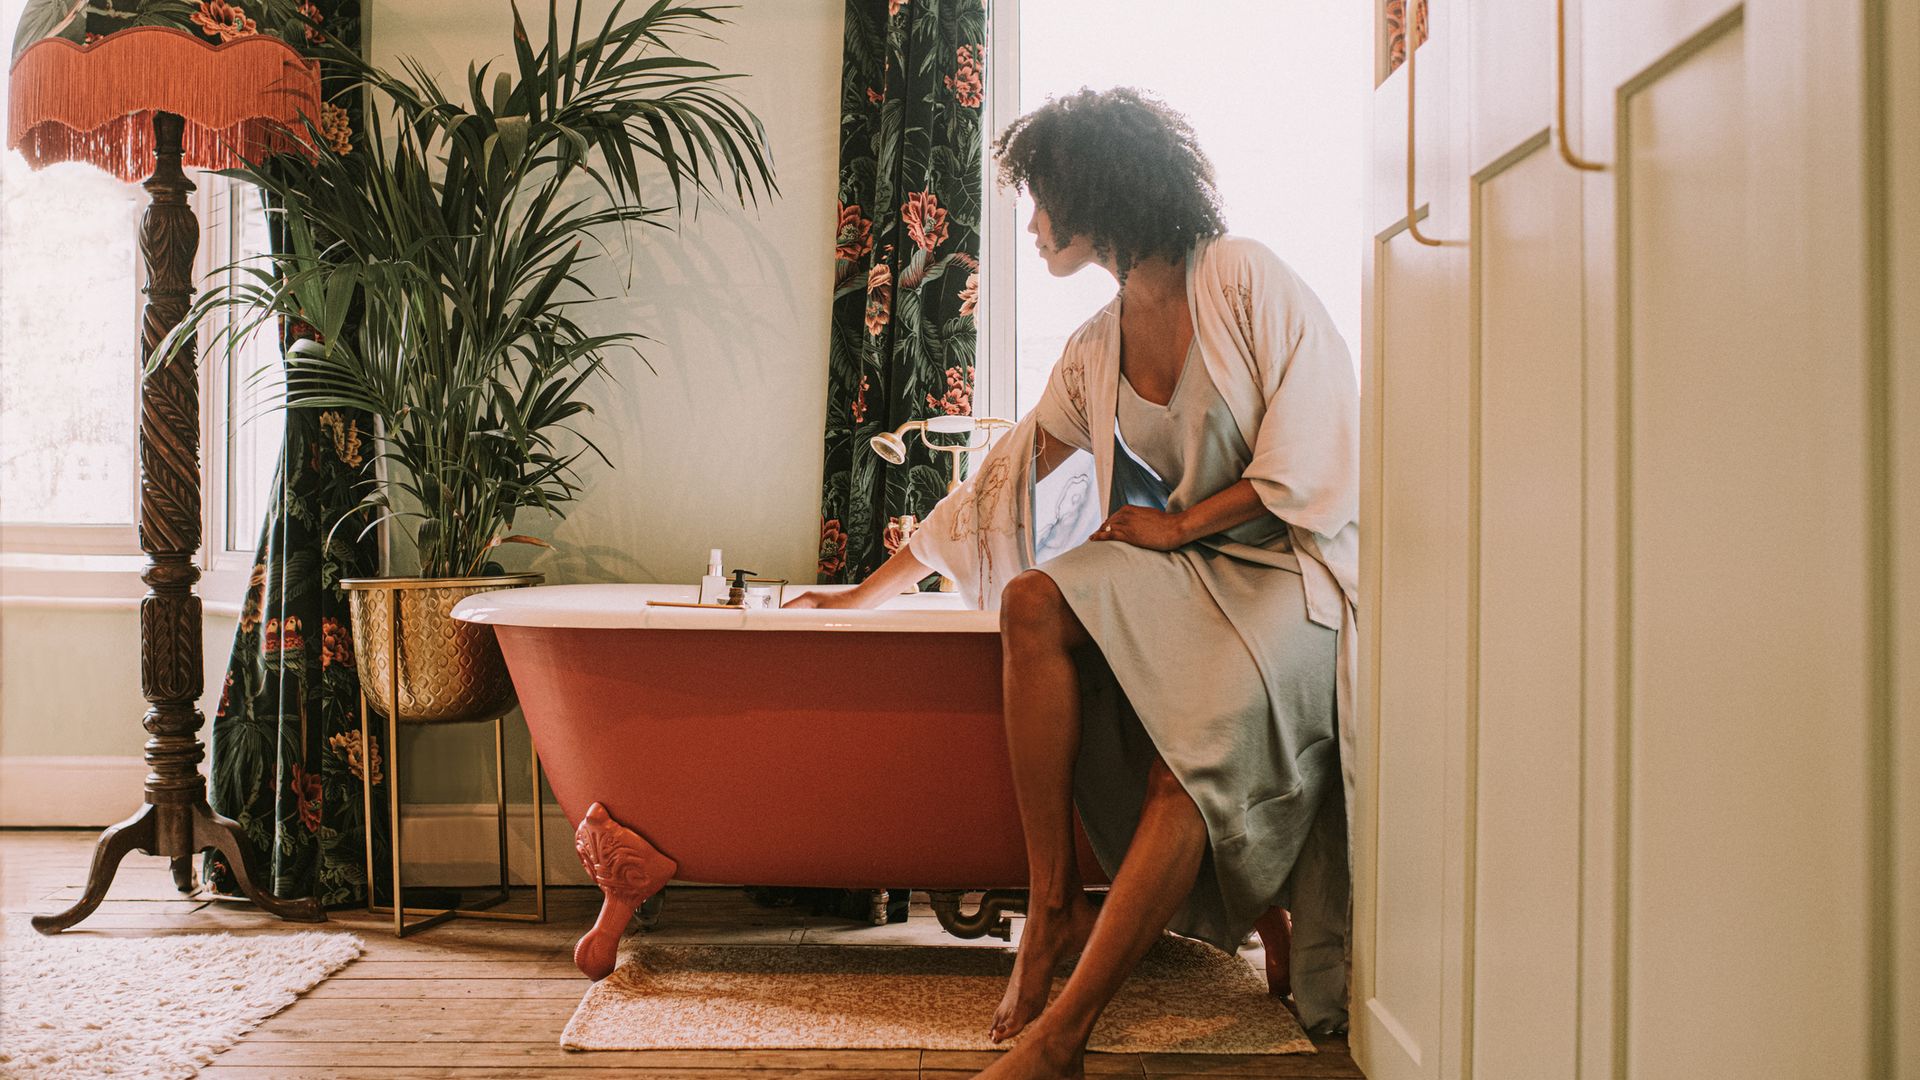 A woman perches on the side of an elegant red roll top bathtub.